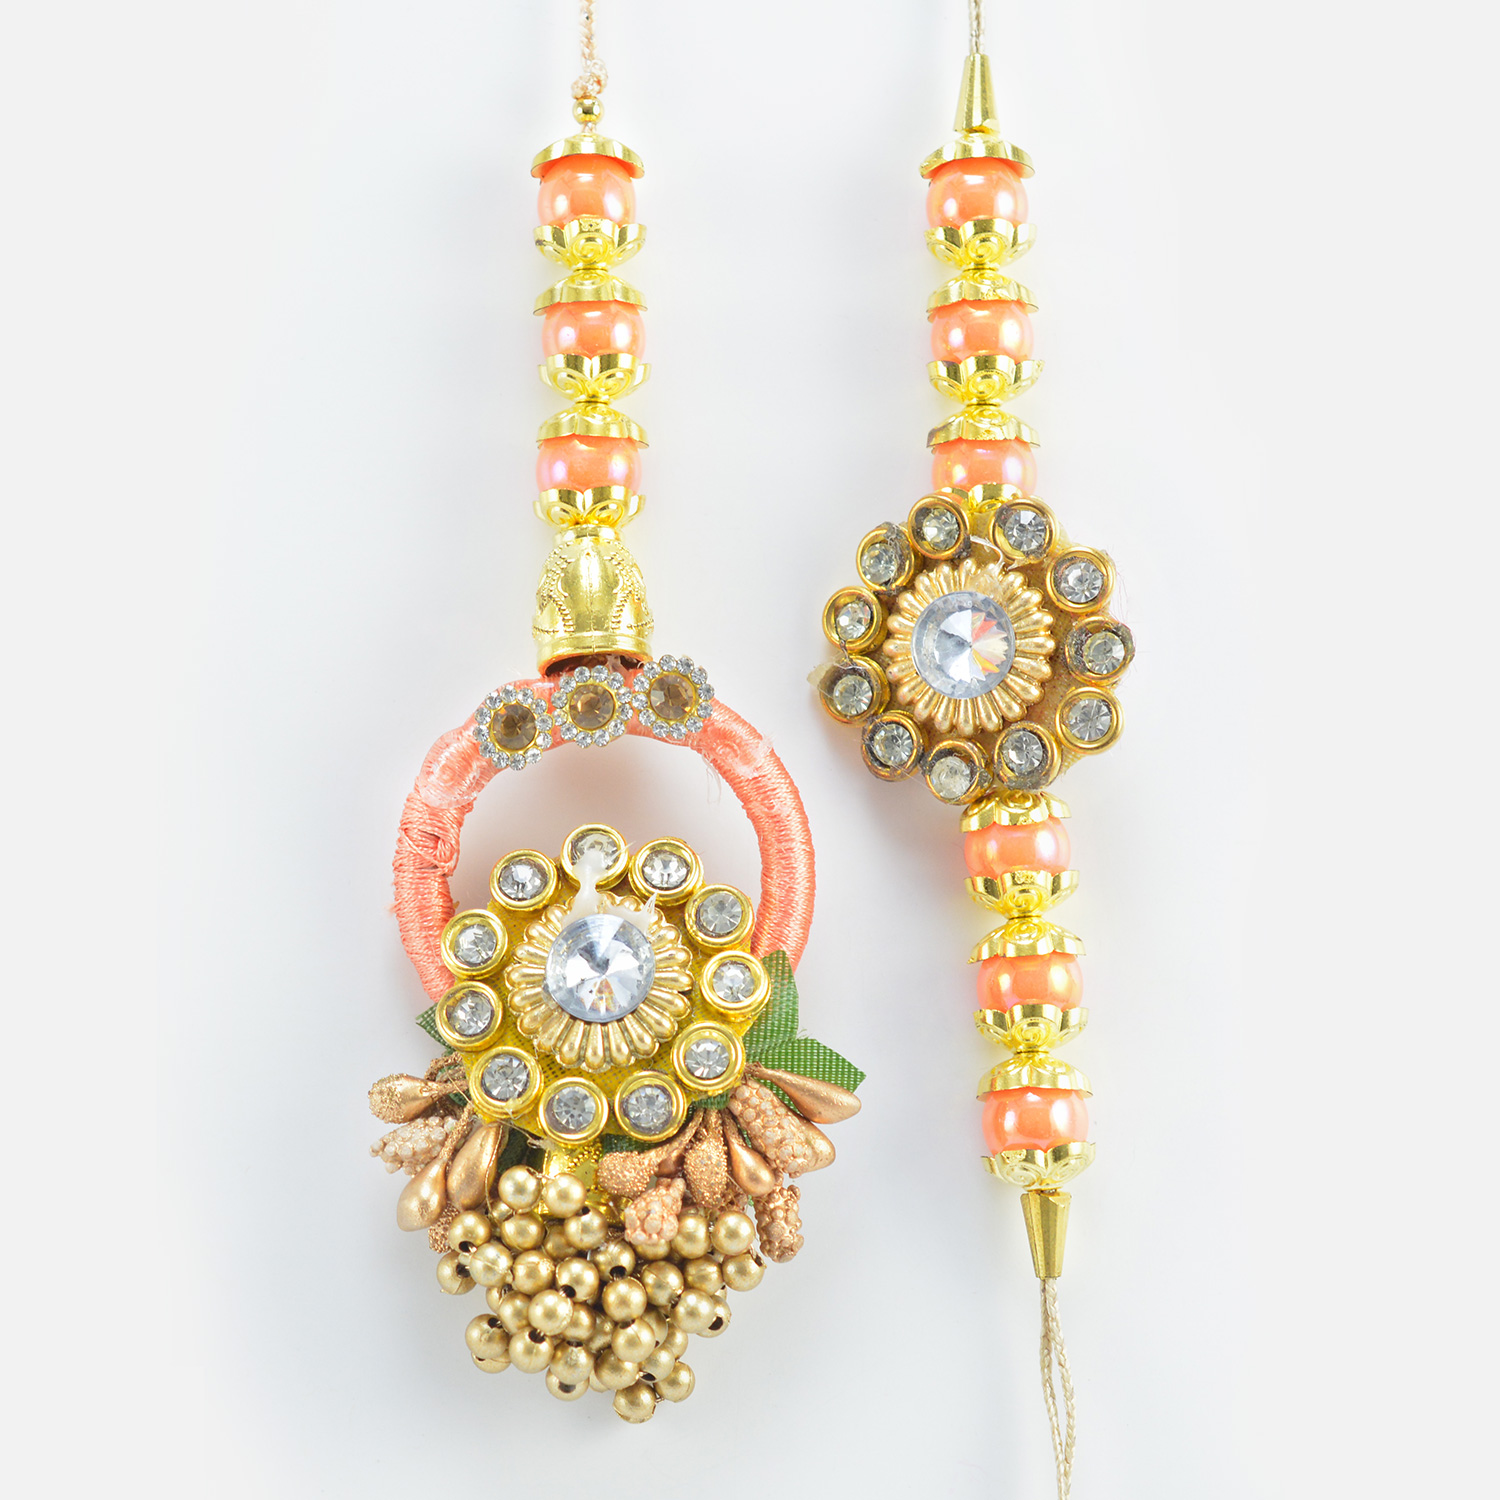 Heavy Design Magnificent Looking Awesome Rich Looking Pair of Rakhis for Bhaiya and Bhabhi